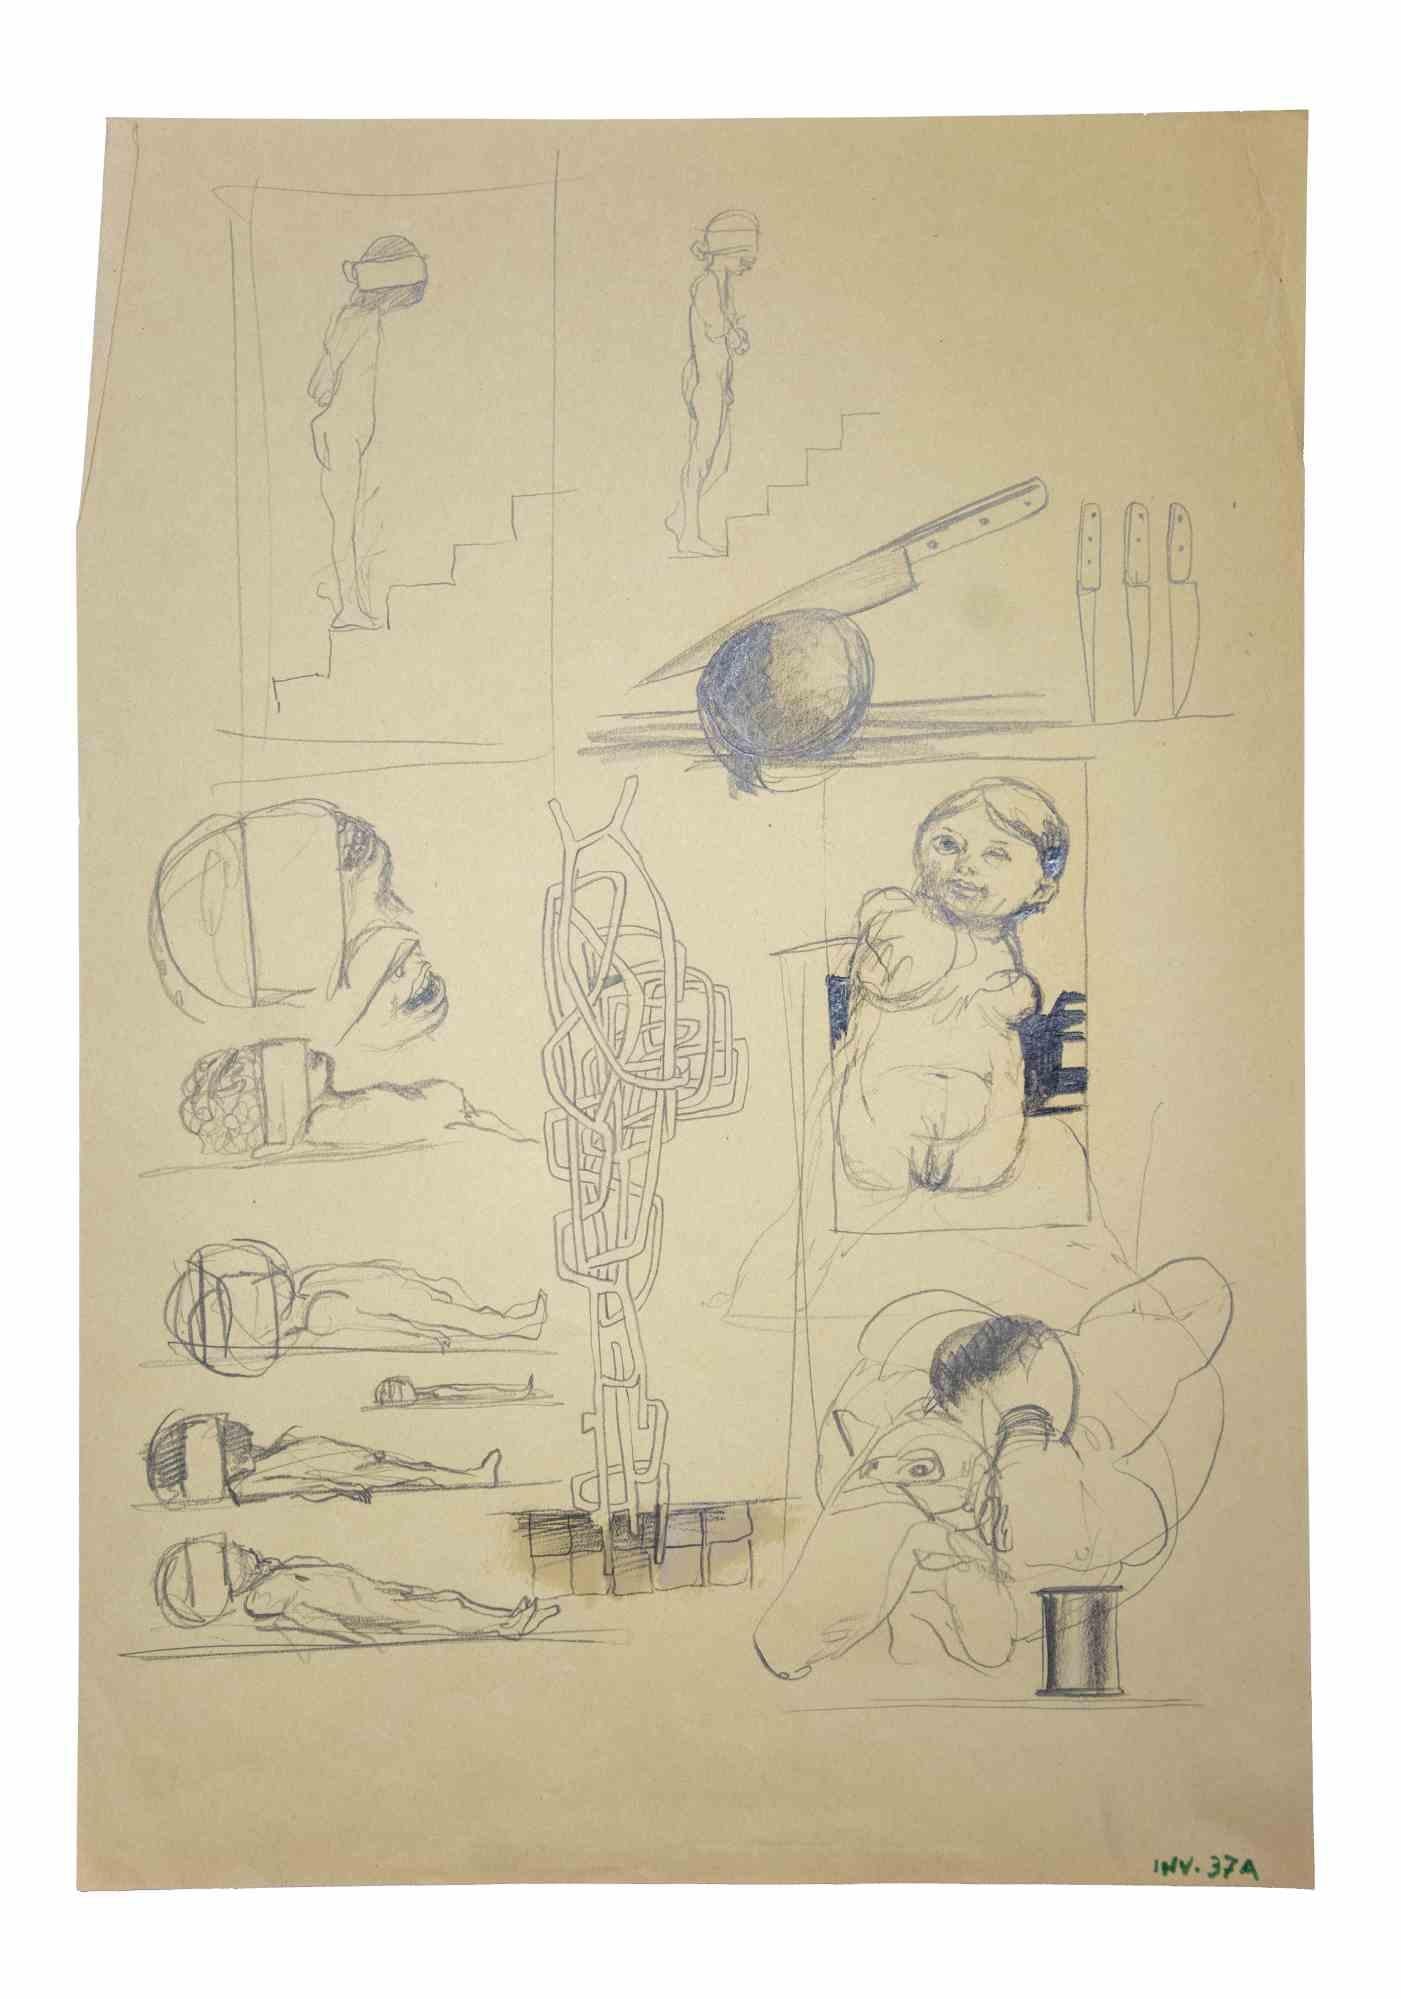 Surreal Scene is an original contemporary artwork realized in the 1970s by the Italian Contemporary artist  Leo Guida  (1992 - 2017).

Original drawings in pencil on paper.

Good conditions but aged.

The artwork is depicted through strong strokes